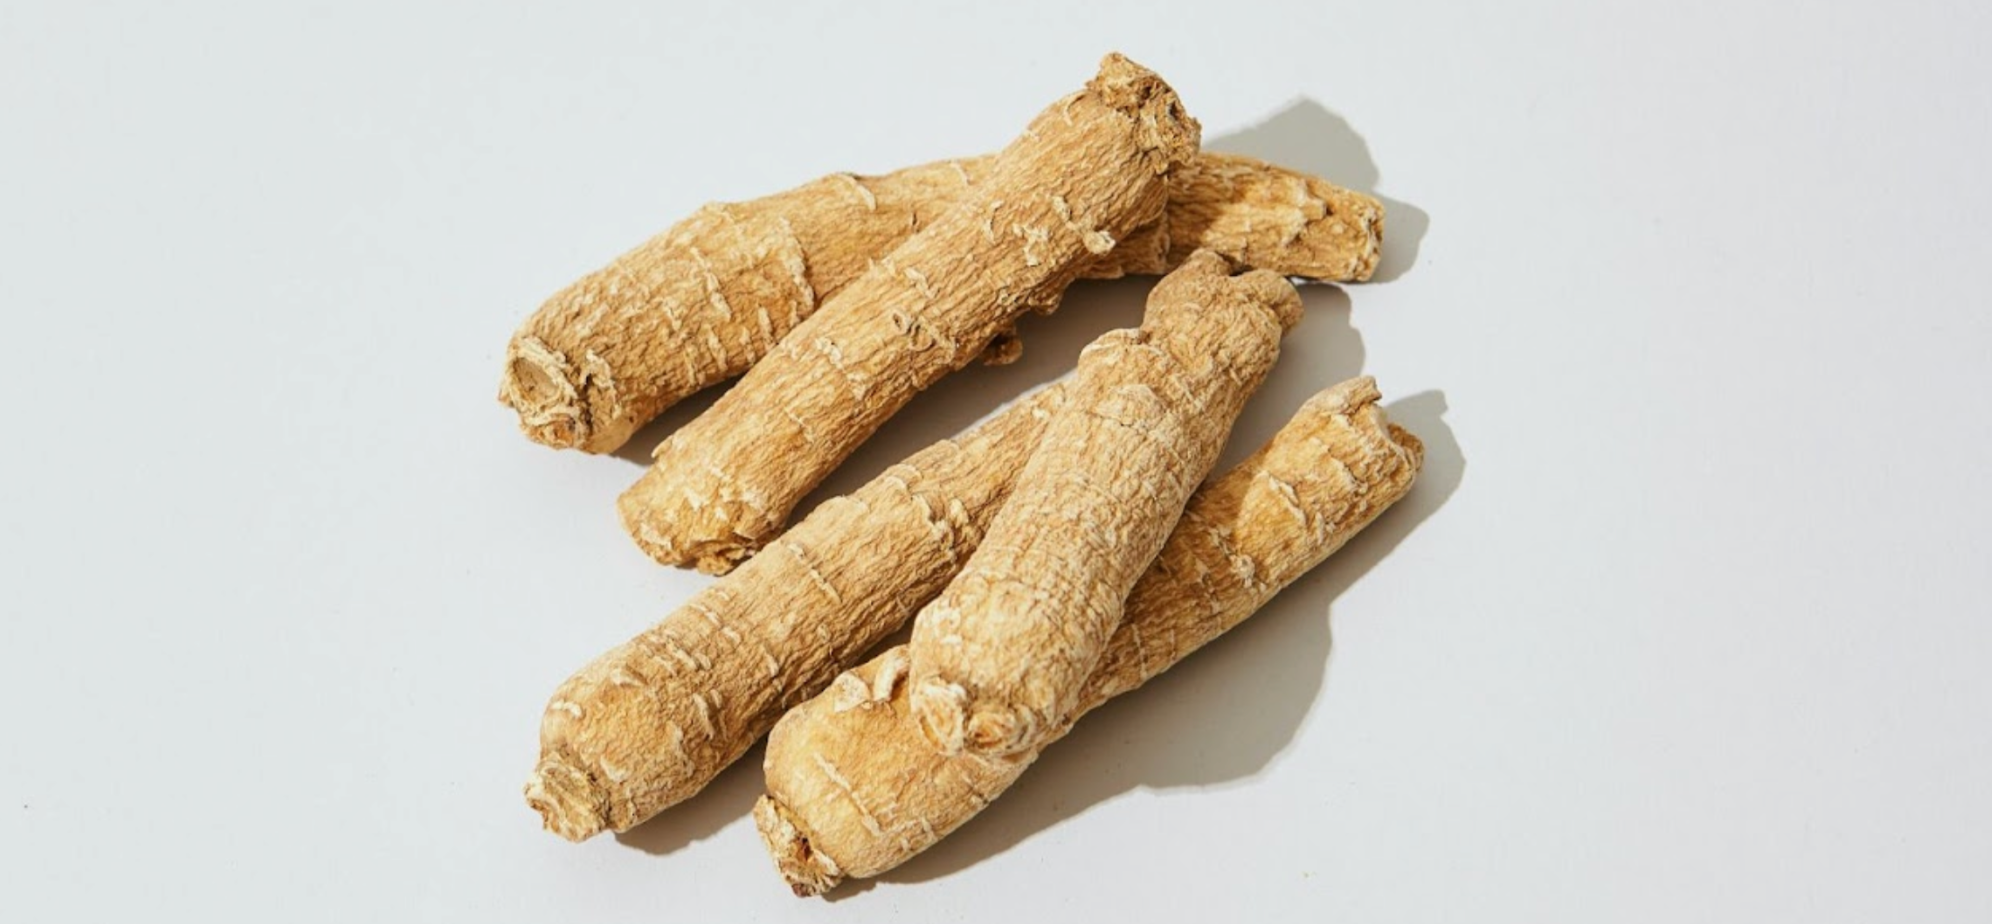 Dried ginseng root